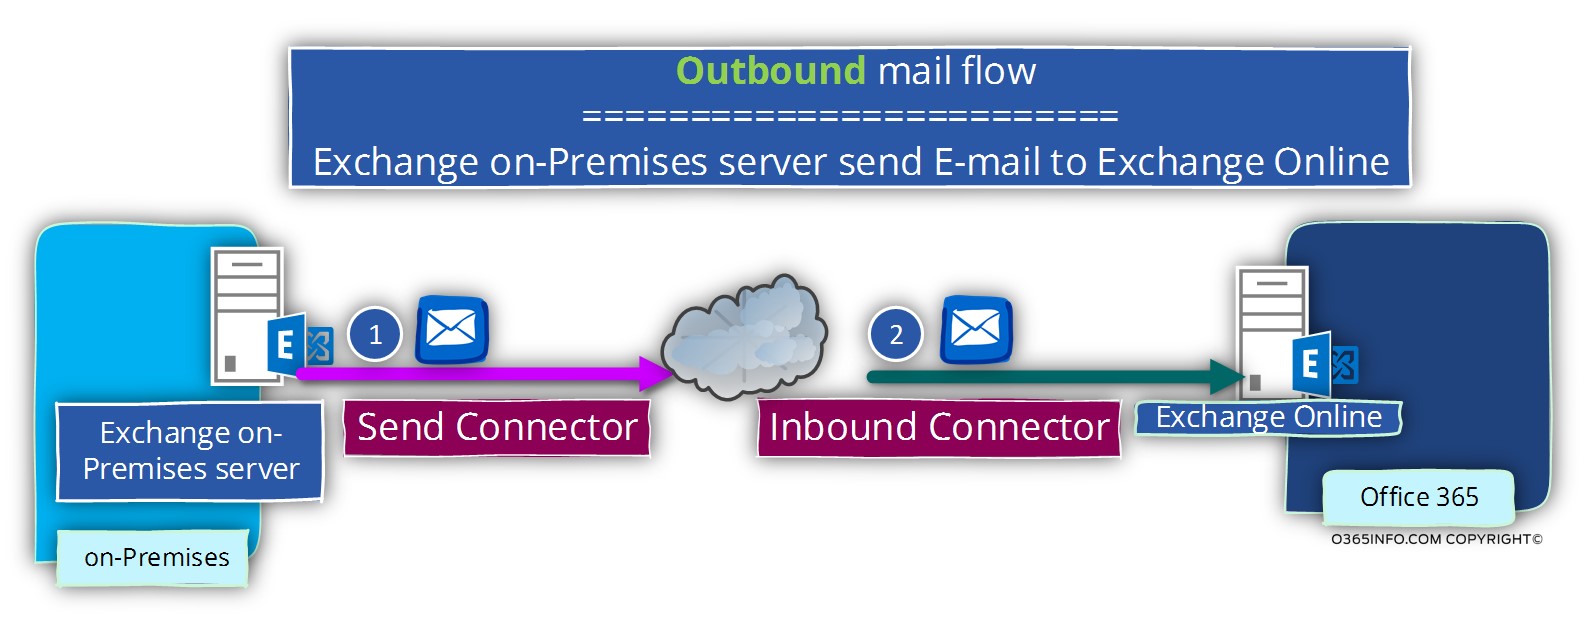 Outbound mail flow - Exchange on-Premises server send E-mail to Exchange Online